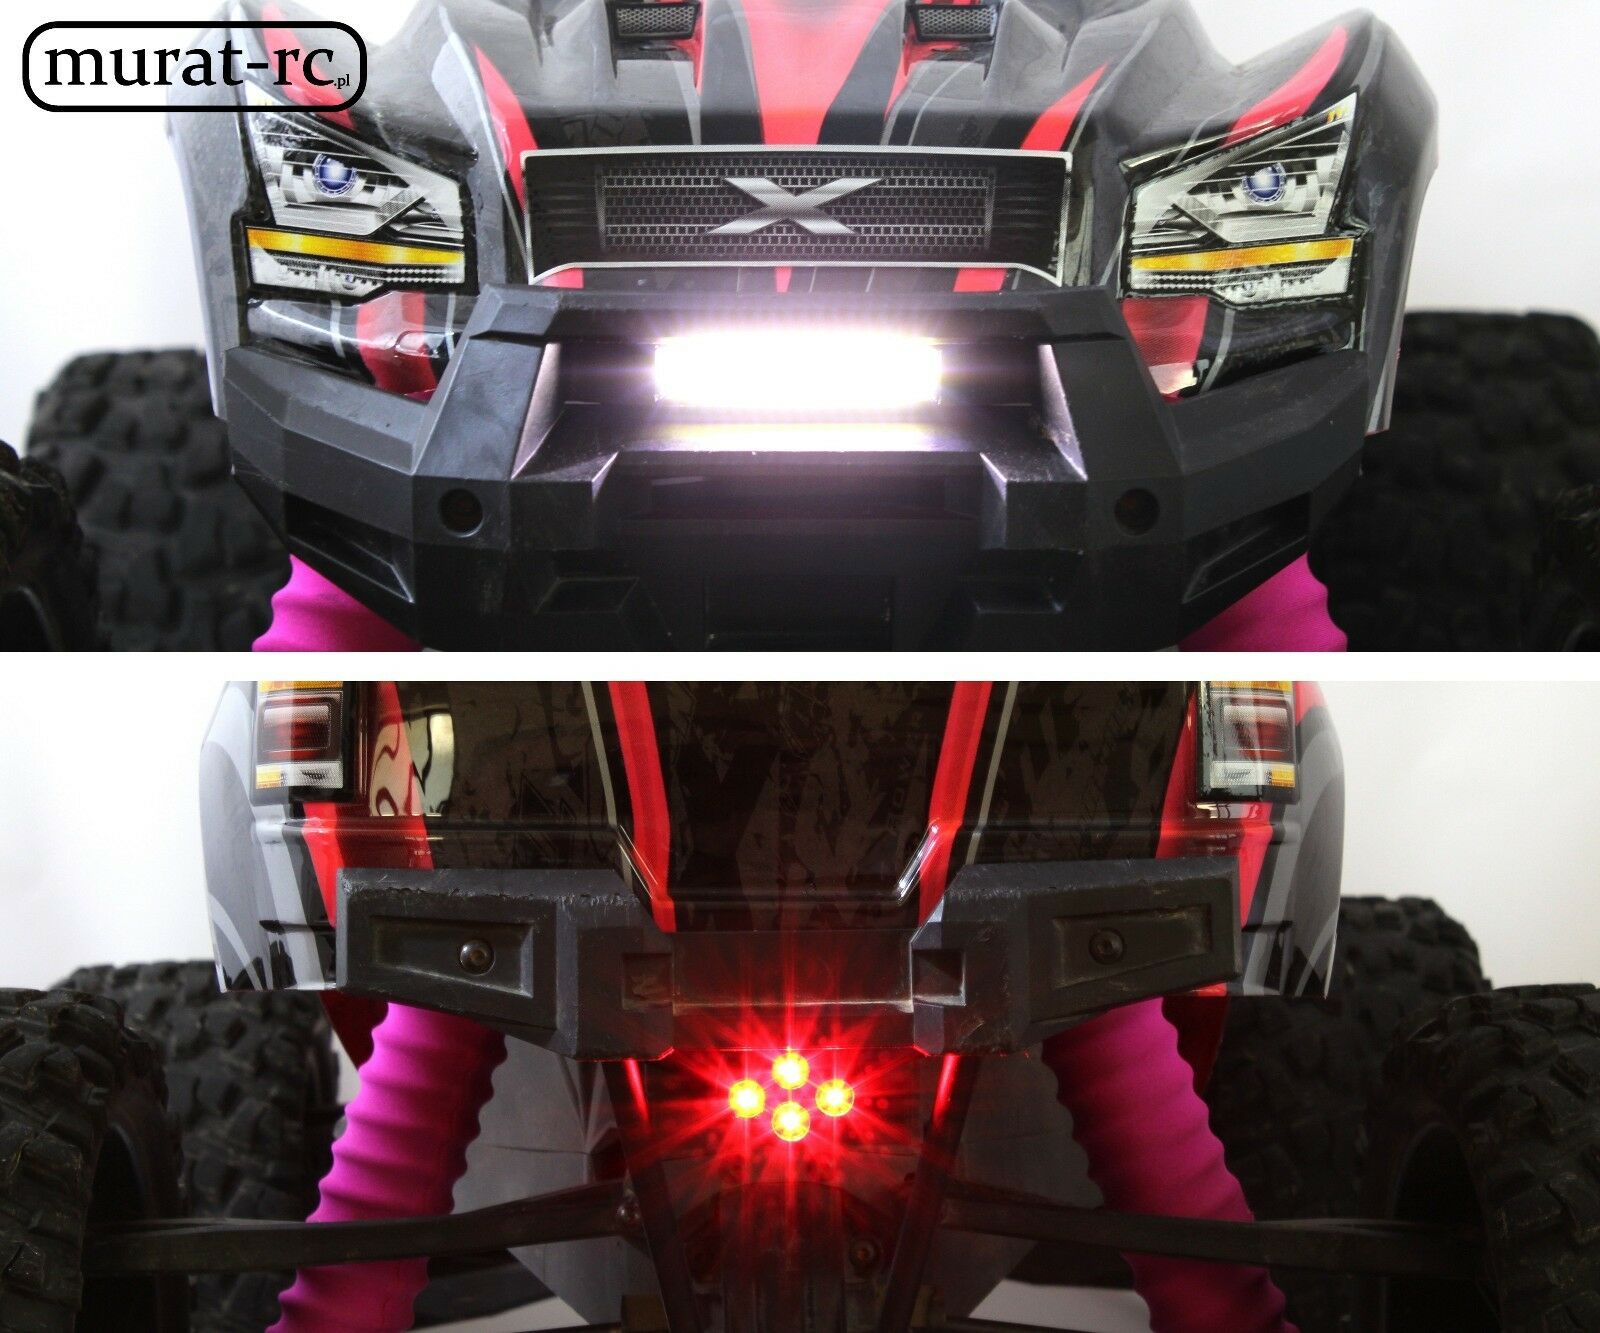 Led Lights Front Single And Rear For Traxxas X-maxx Waterproof By Murat-rc